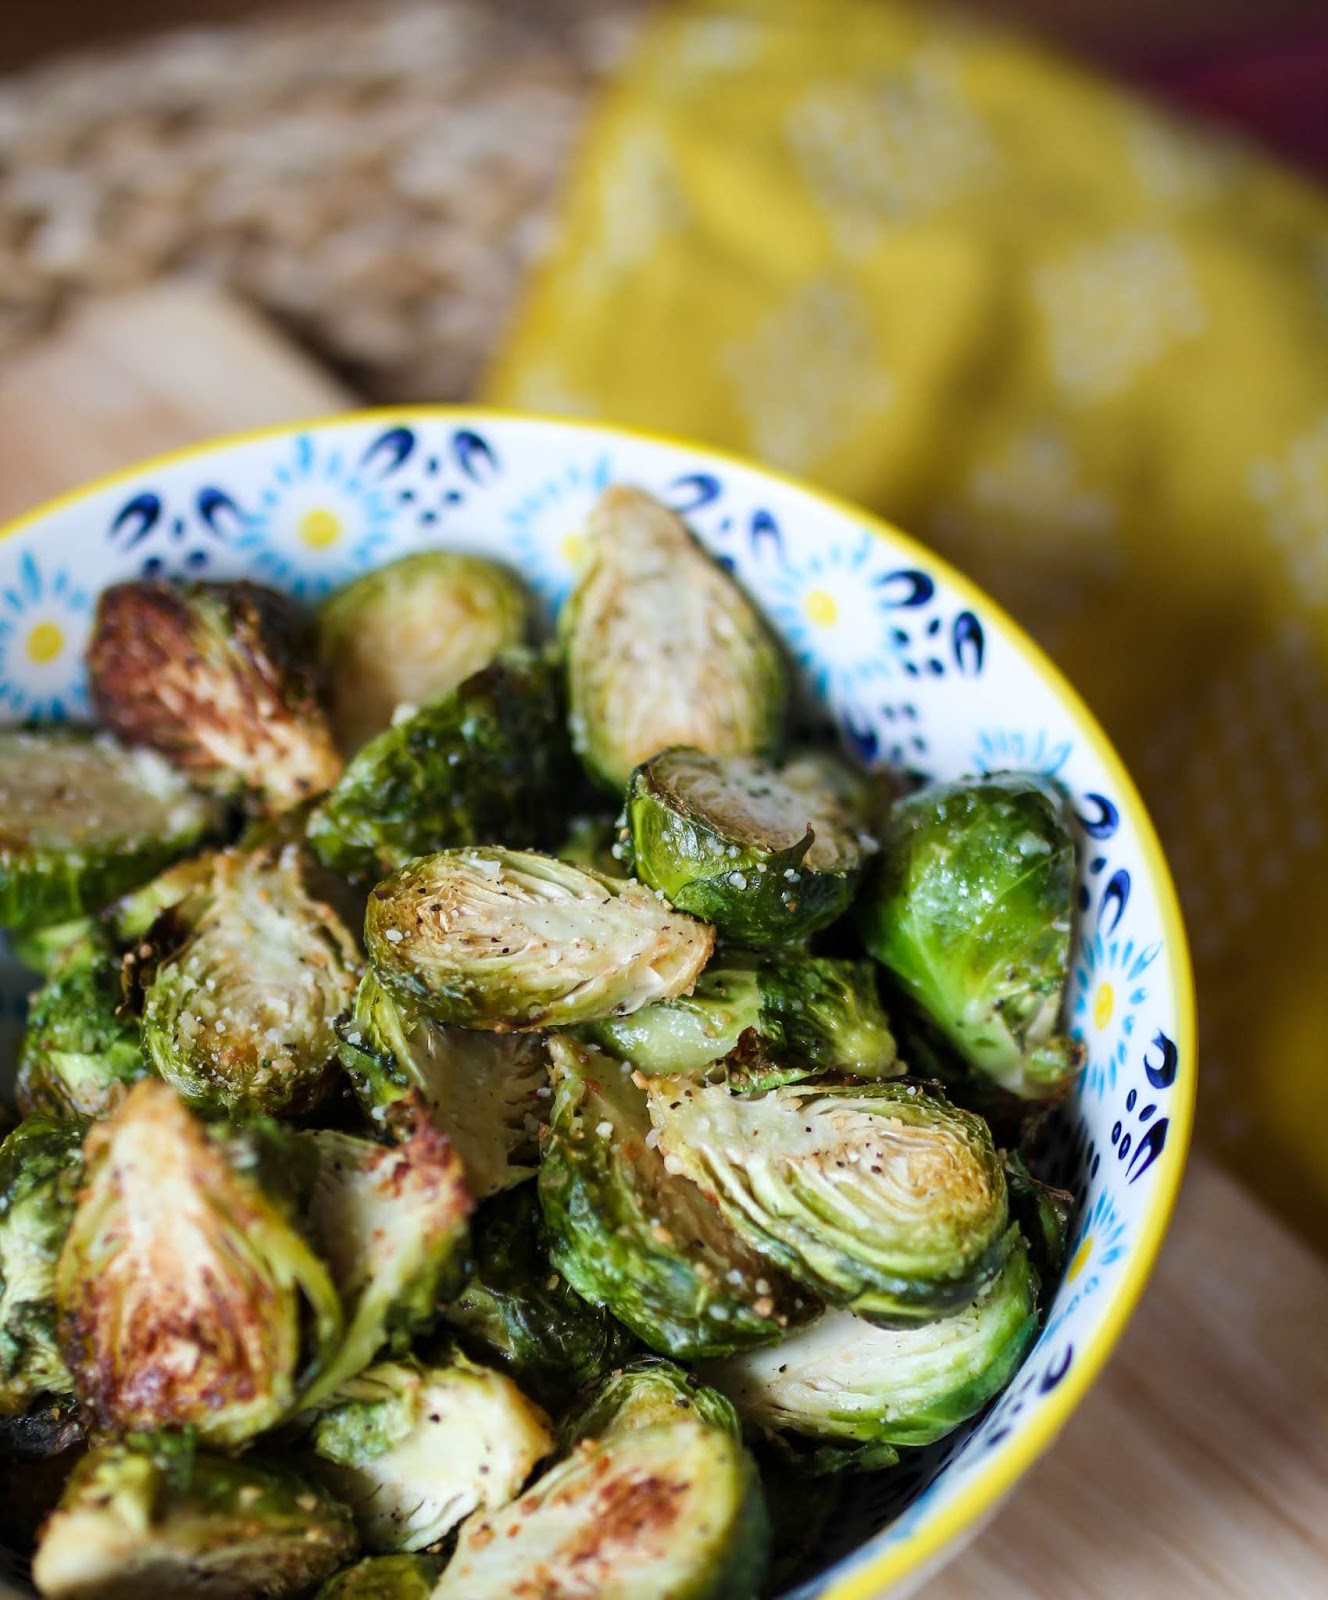 crispy brussel sprout recipes, brussel sprouts recipes, roasted brussel sprouts , parmesan roasted Brussel sprouts, how to roast Brussel sprouts, easy Brussel sprouts recipes, best Brussel sprouts recipes, easy Brussel sprouts, lemon pepper Brussel sprouts, crispy roasted Brussel sprouts, the right way to roast Brussel sprouts